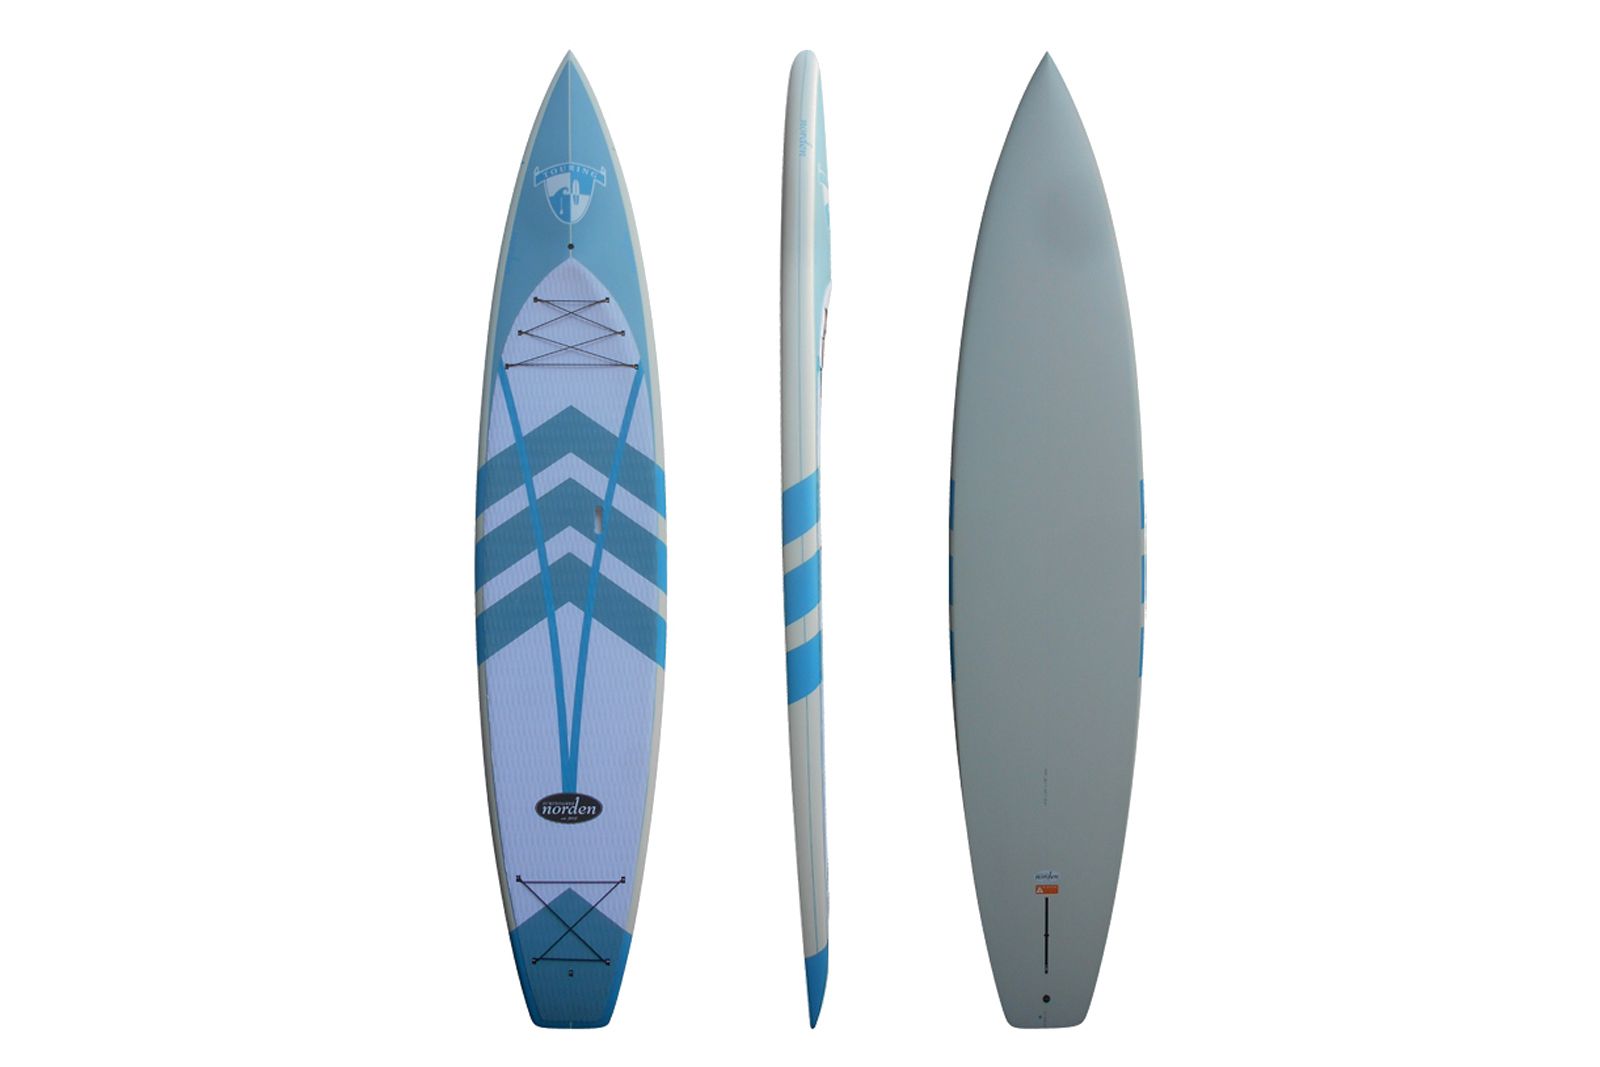 Norden-Surfboards Touring SUP